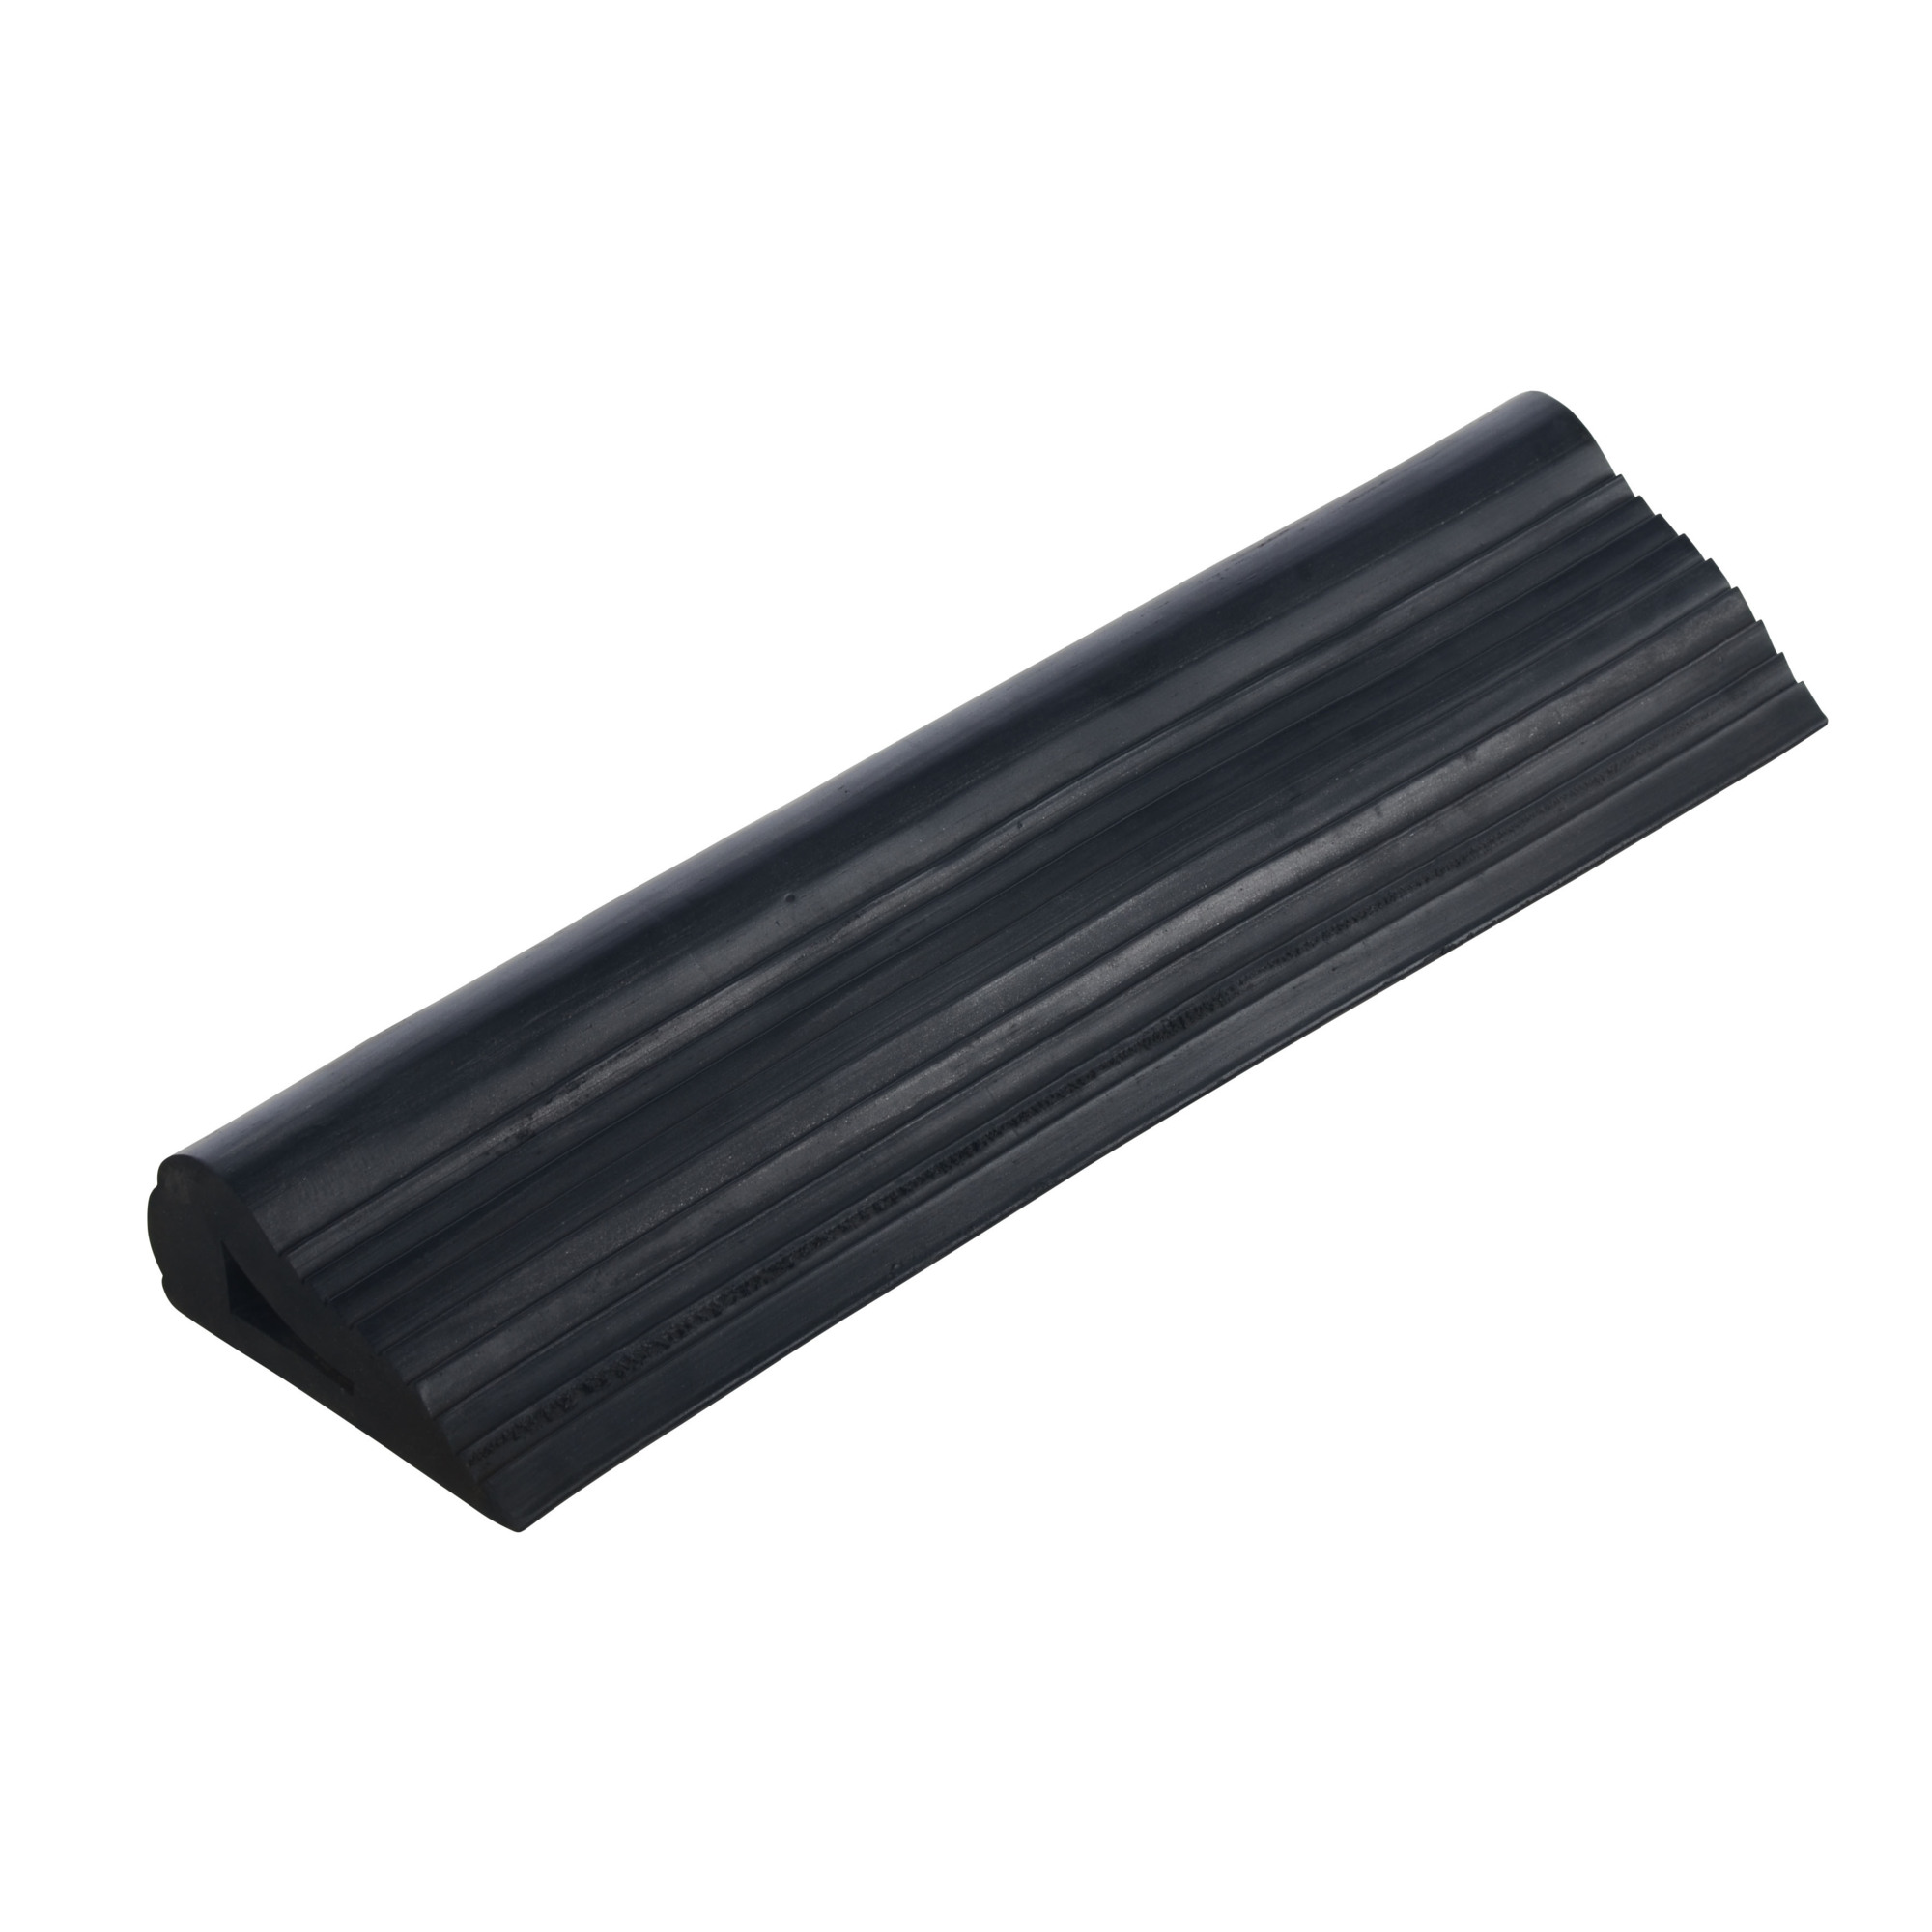 Vestil 6 75in X24in Indust Rubber Wedge Product Style Molded Length